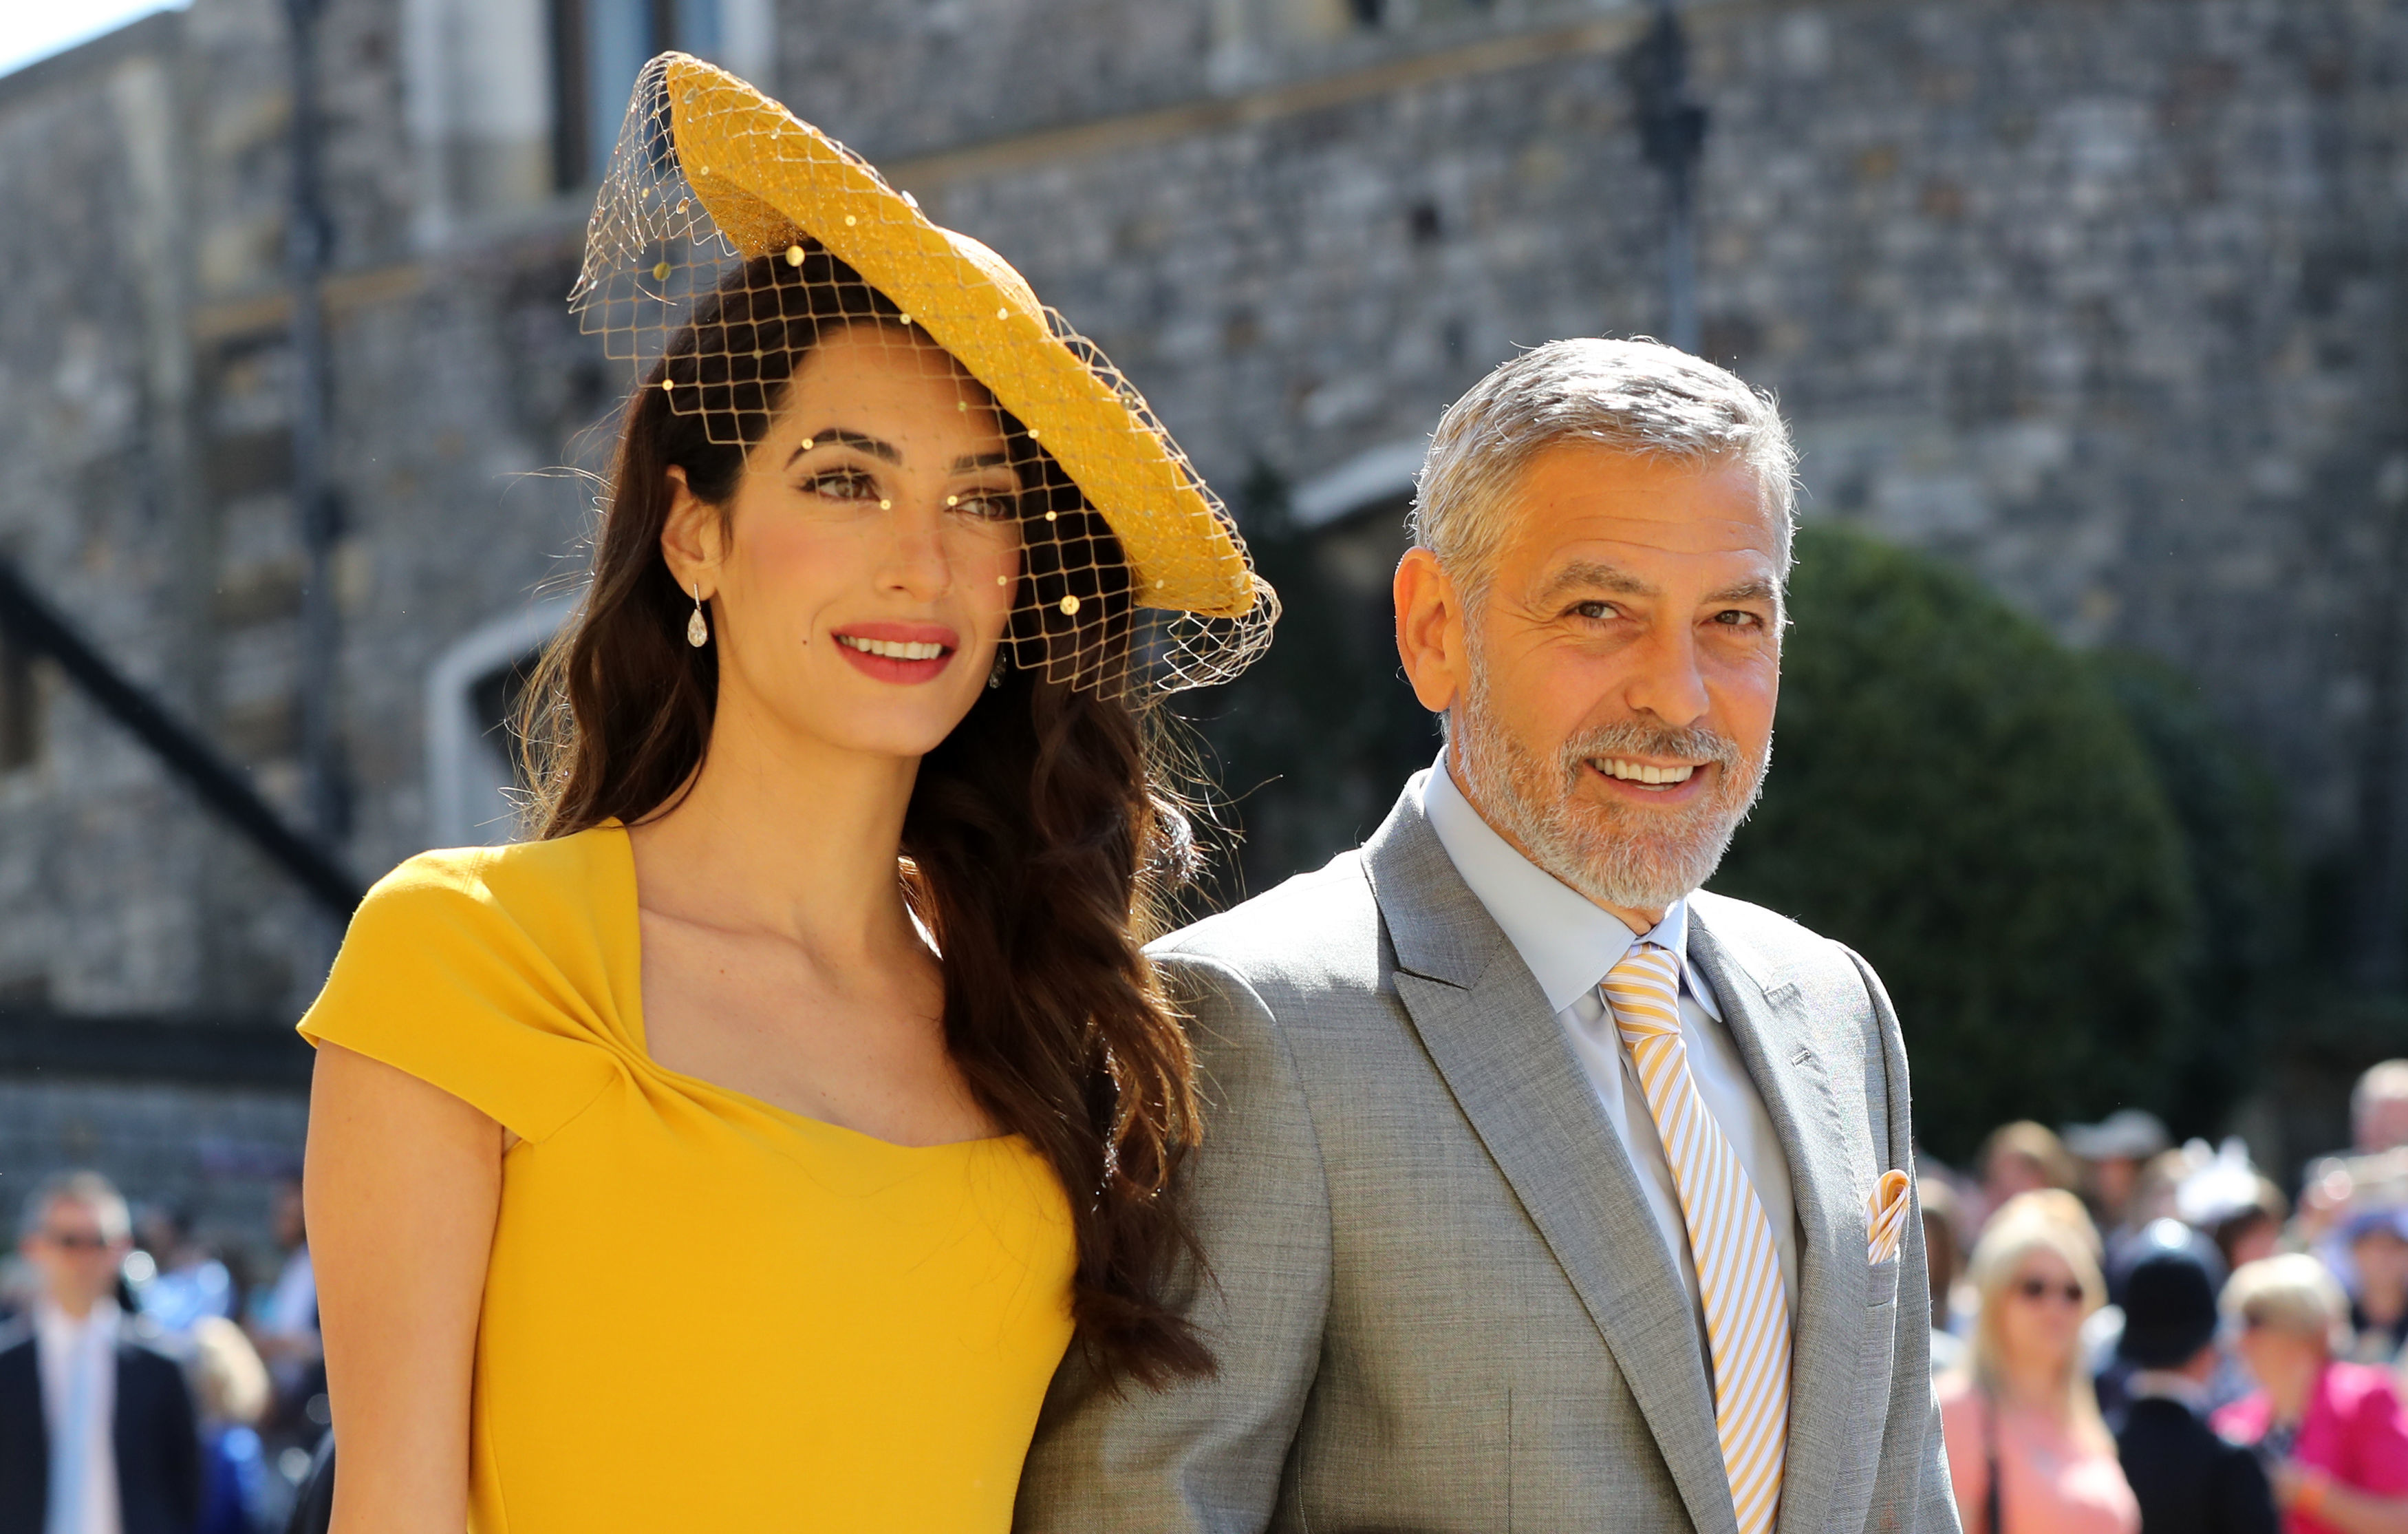 Amal Clooney and George Clooney arrive attending the wedding of Meghan Markle and Prince Harry (Gareth Fuller/PA Wire)